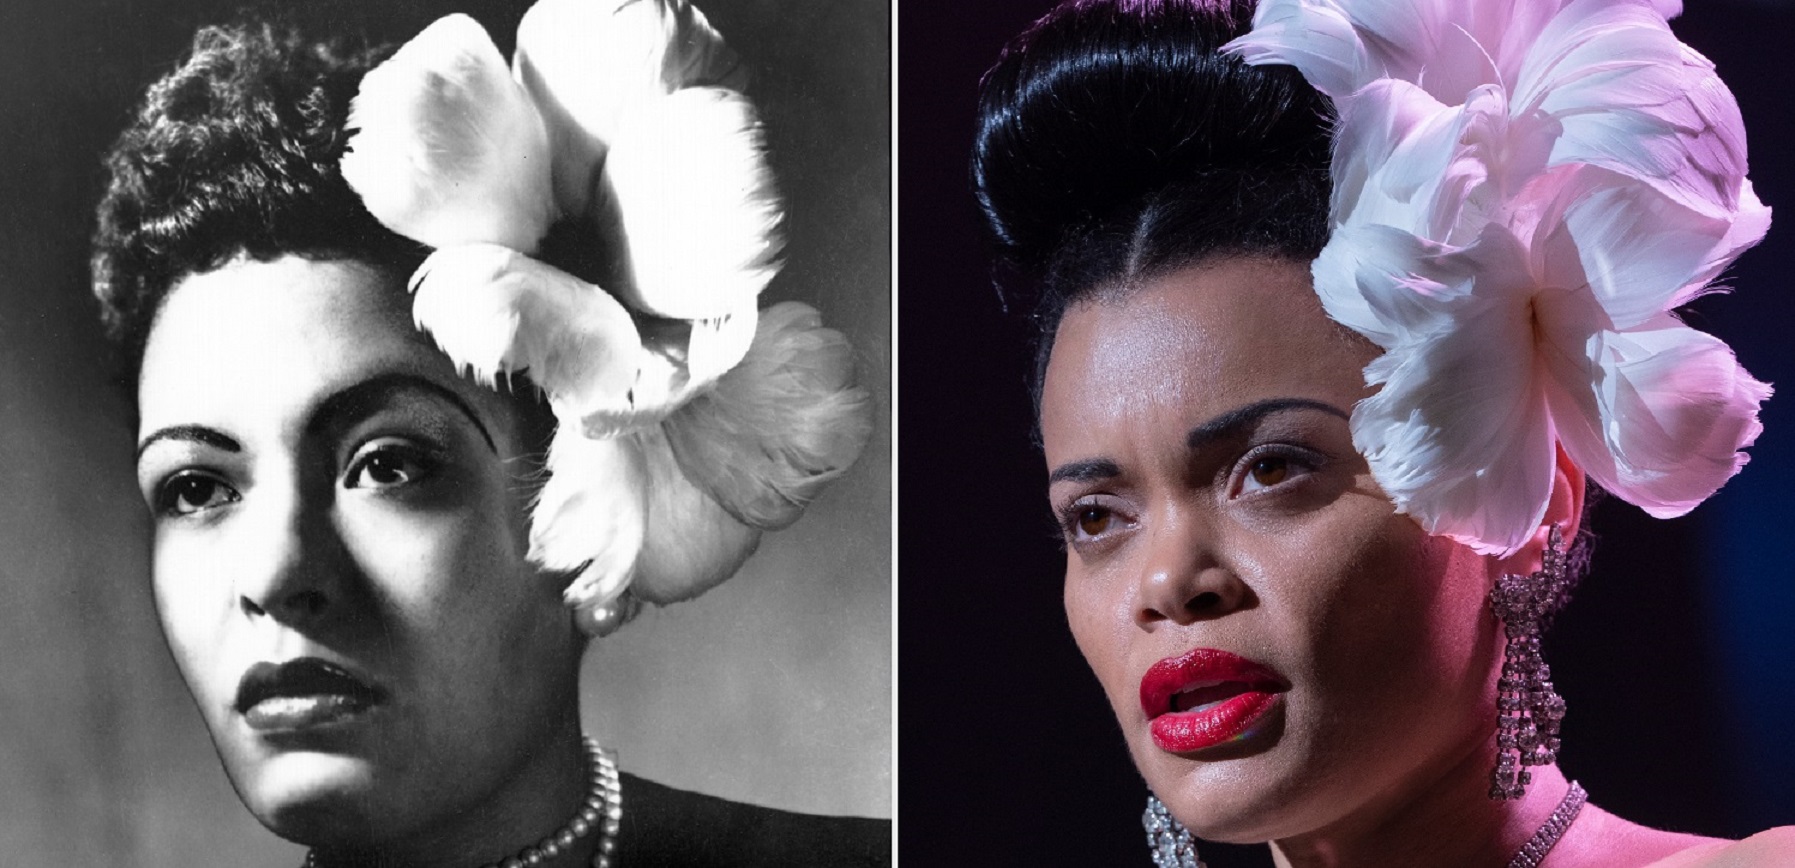 Andra Day Lost 39 Lbs. to Play Billie Holiday in Biopic: ‘Asked God to give me pain and trauma’ [Trailer Inside]